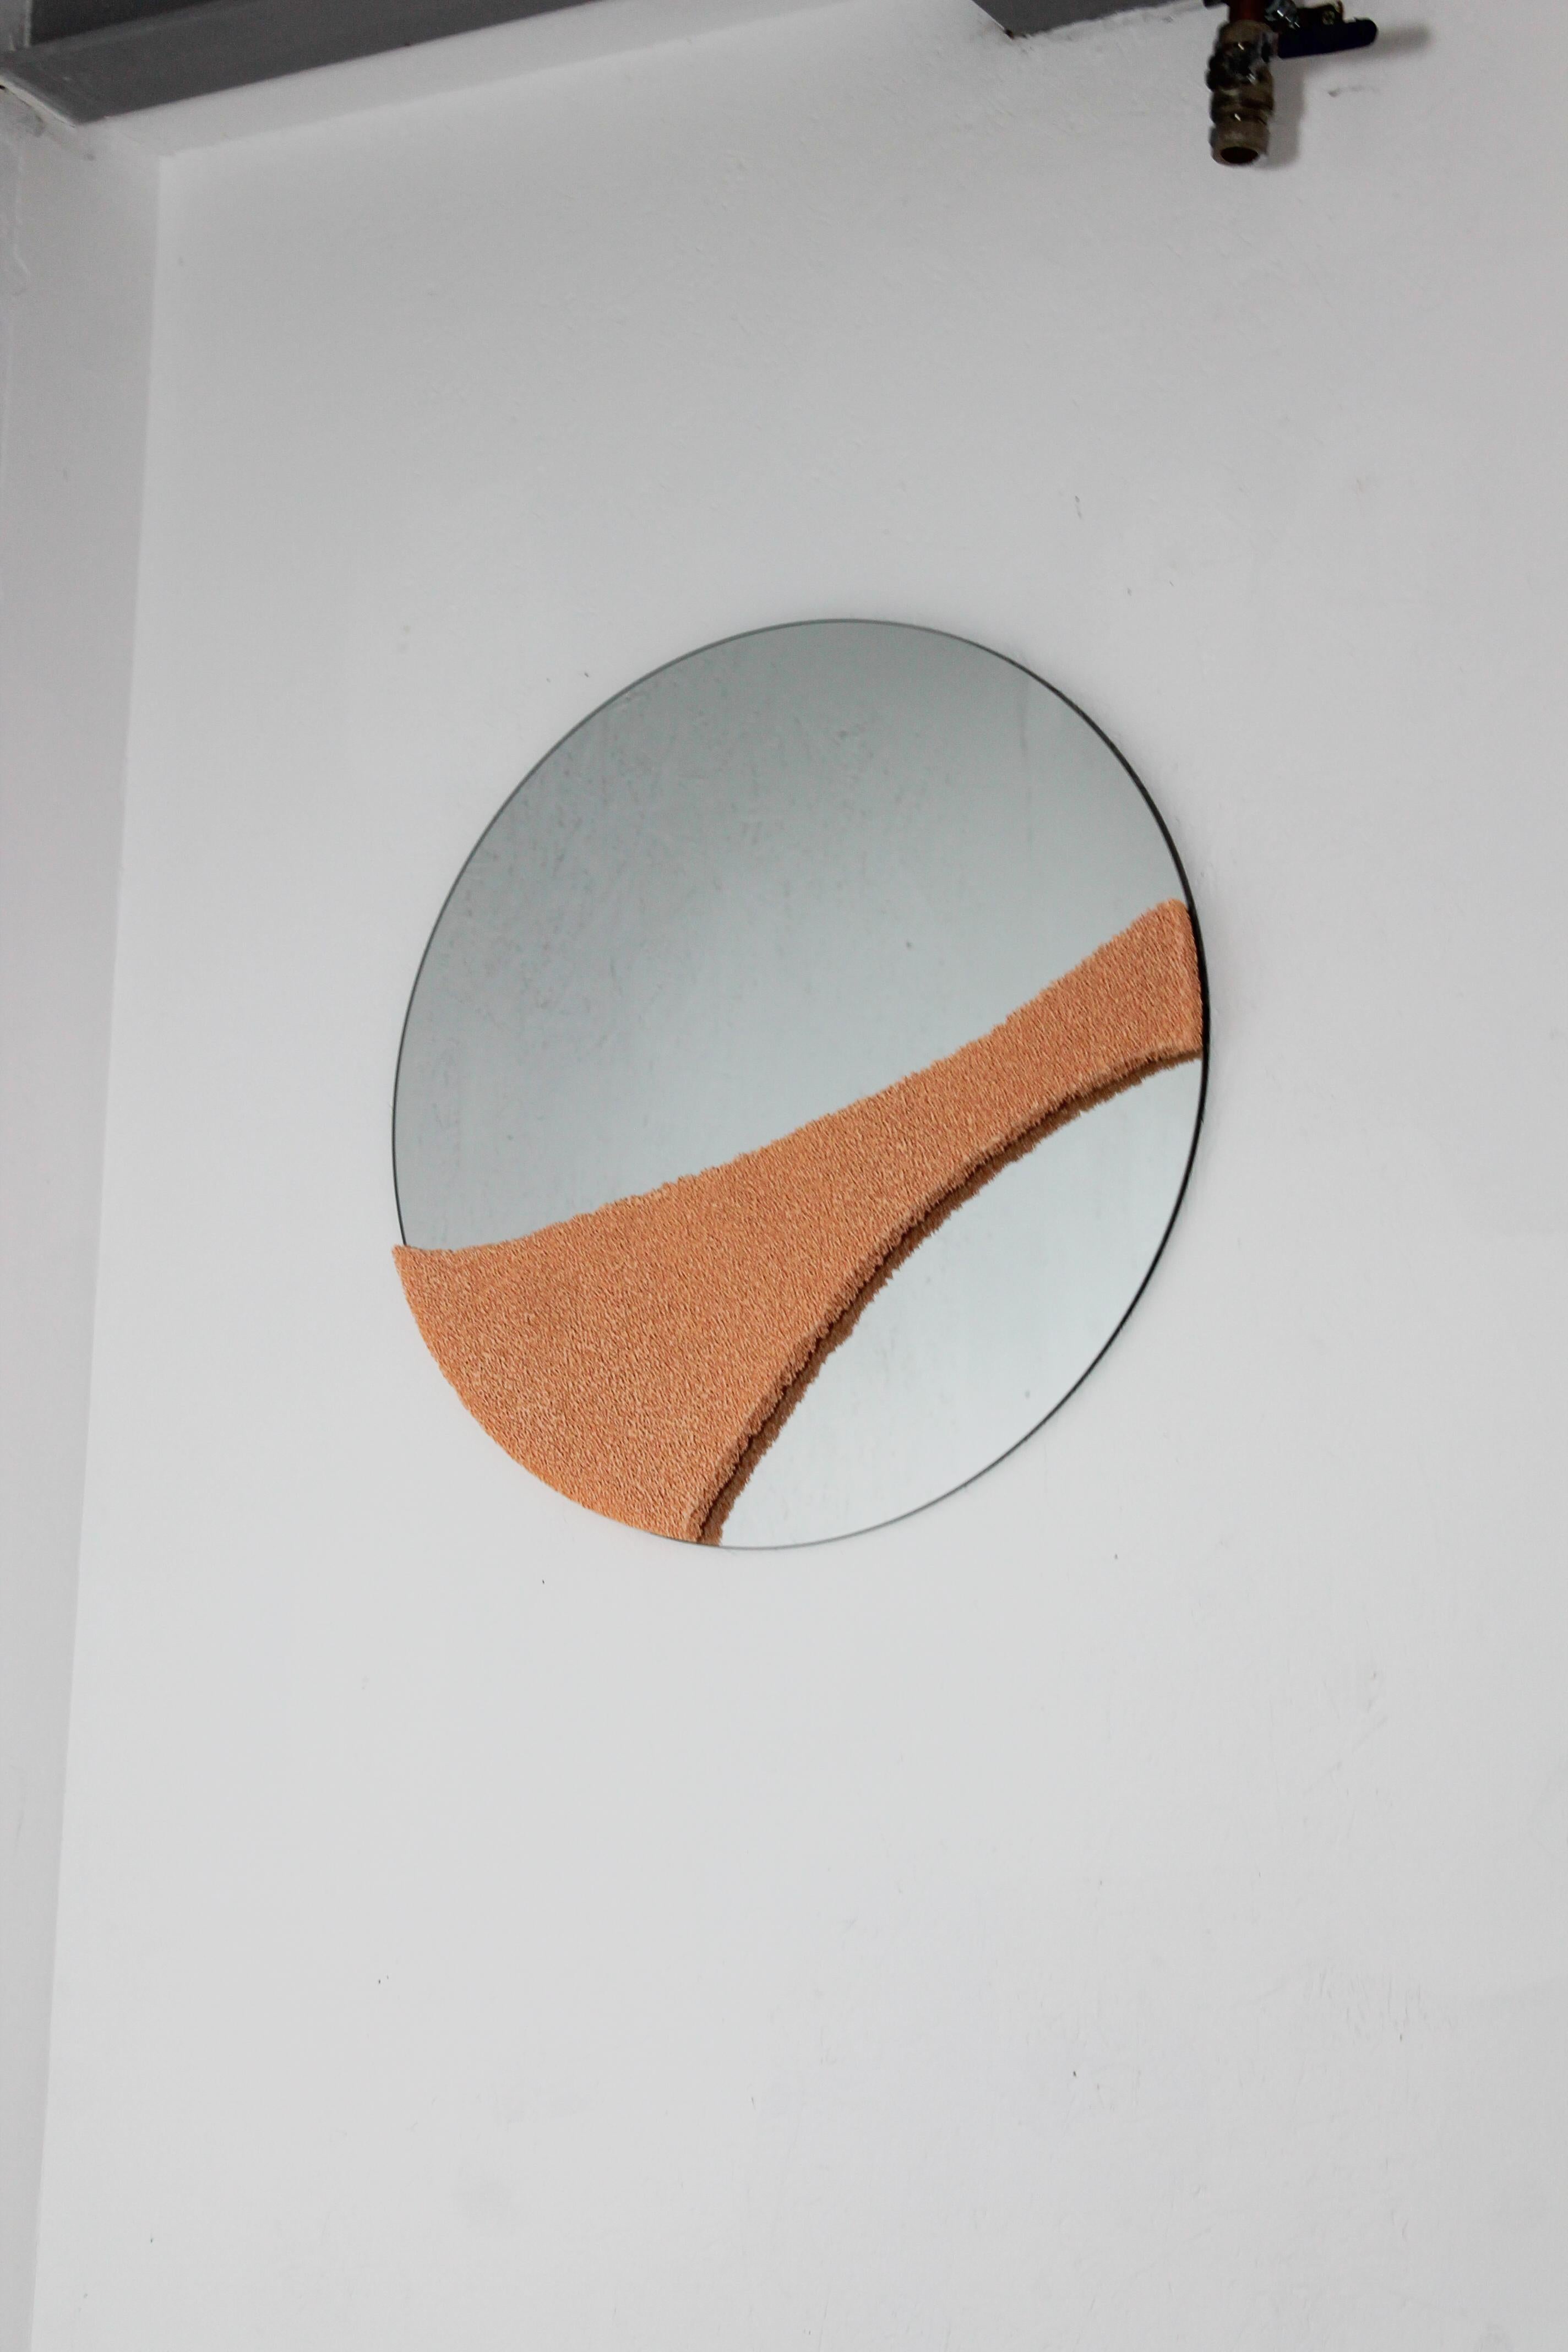 The BC Mirror is one of the largest mirrors that Designer Jordan Keaney has made, featuring his signature Ceramic Foam on the front, transforming these mirrors into functional sculptures. The porous ceramic structure is one solid cast piece, and